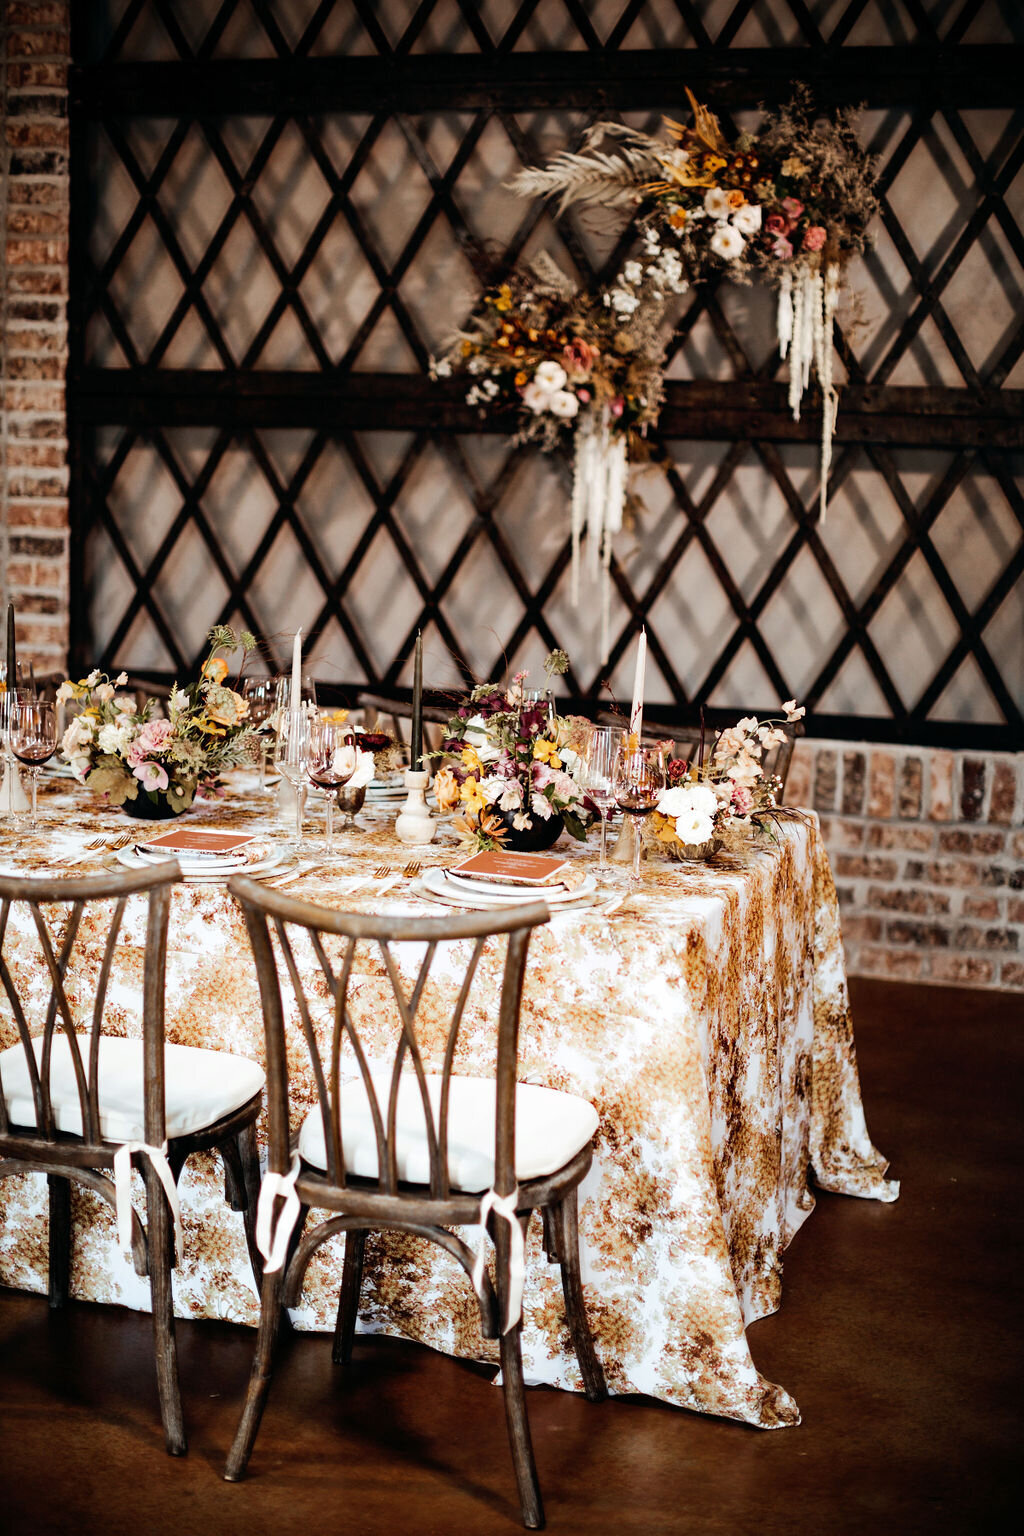 Iron Manor's Banquet Table with Arrangements and Taper Candles